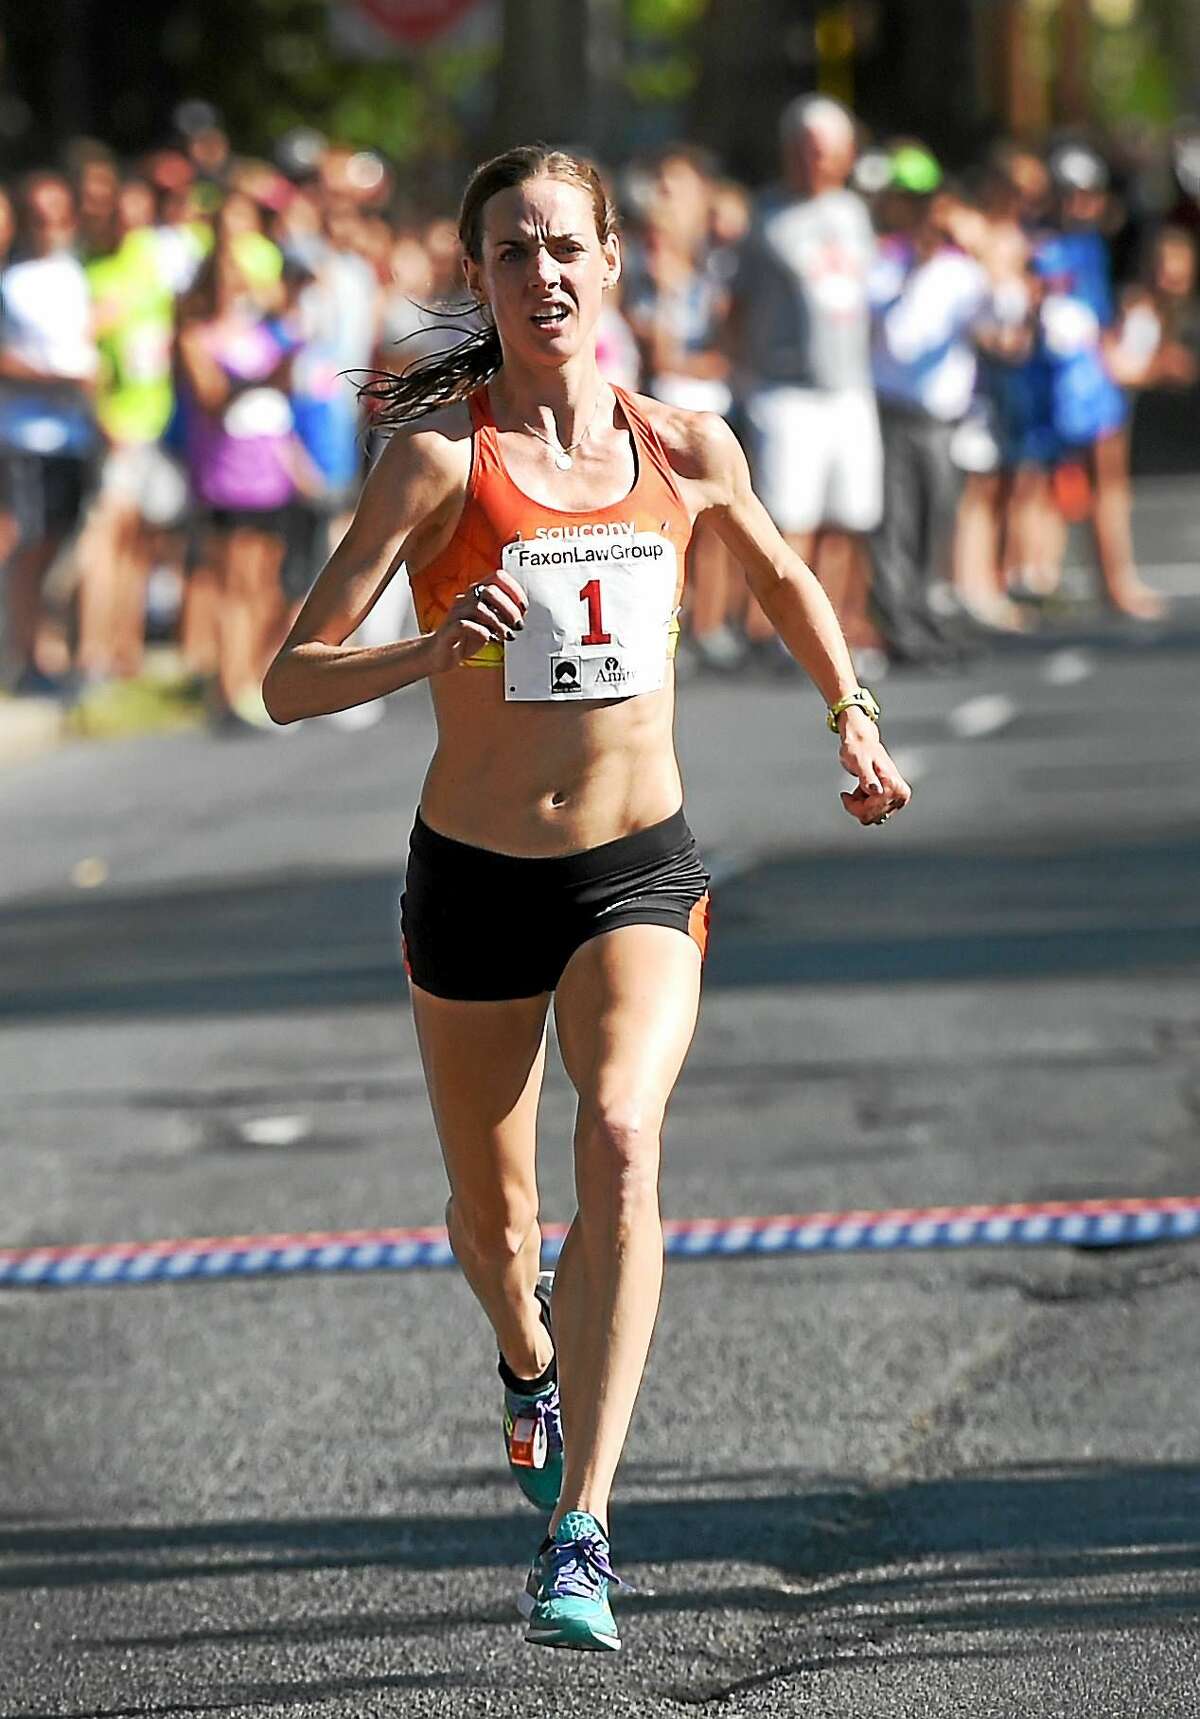 Molly Huddle runs toward the Temple Street finish line en route to winning the Faxon Law New Haven Road Race and 20K national championship on Monday.